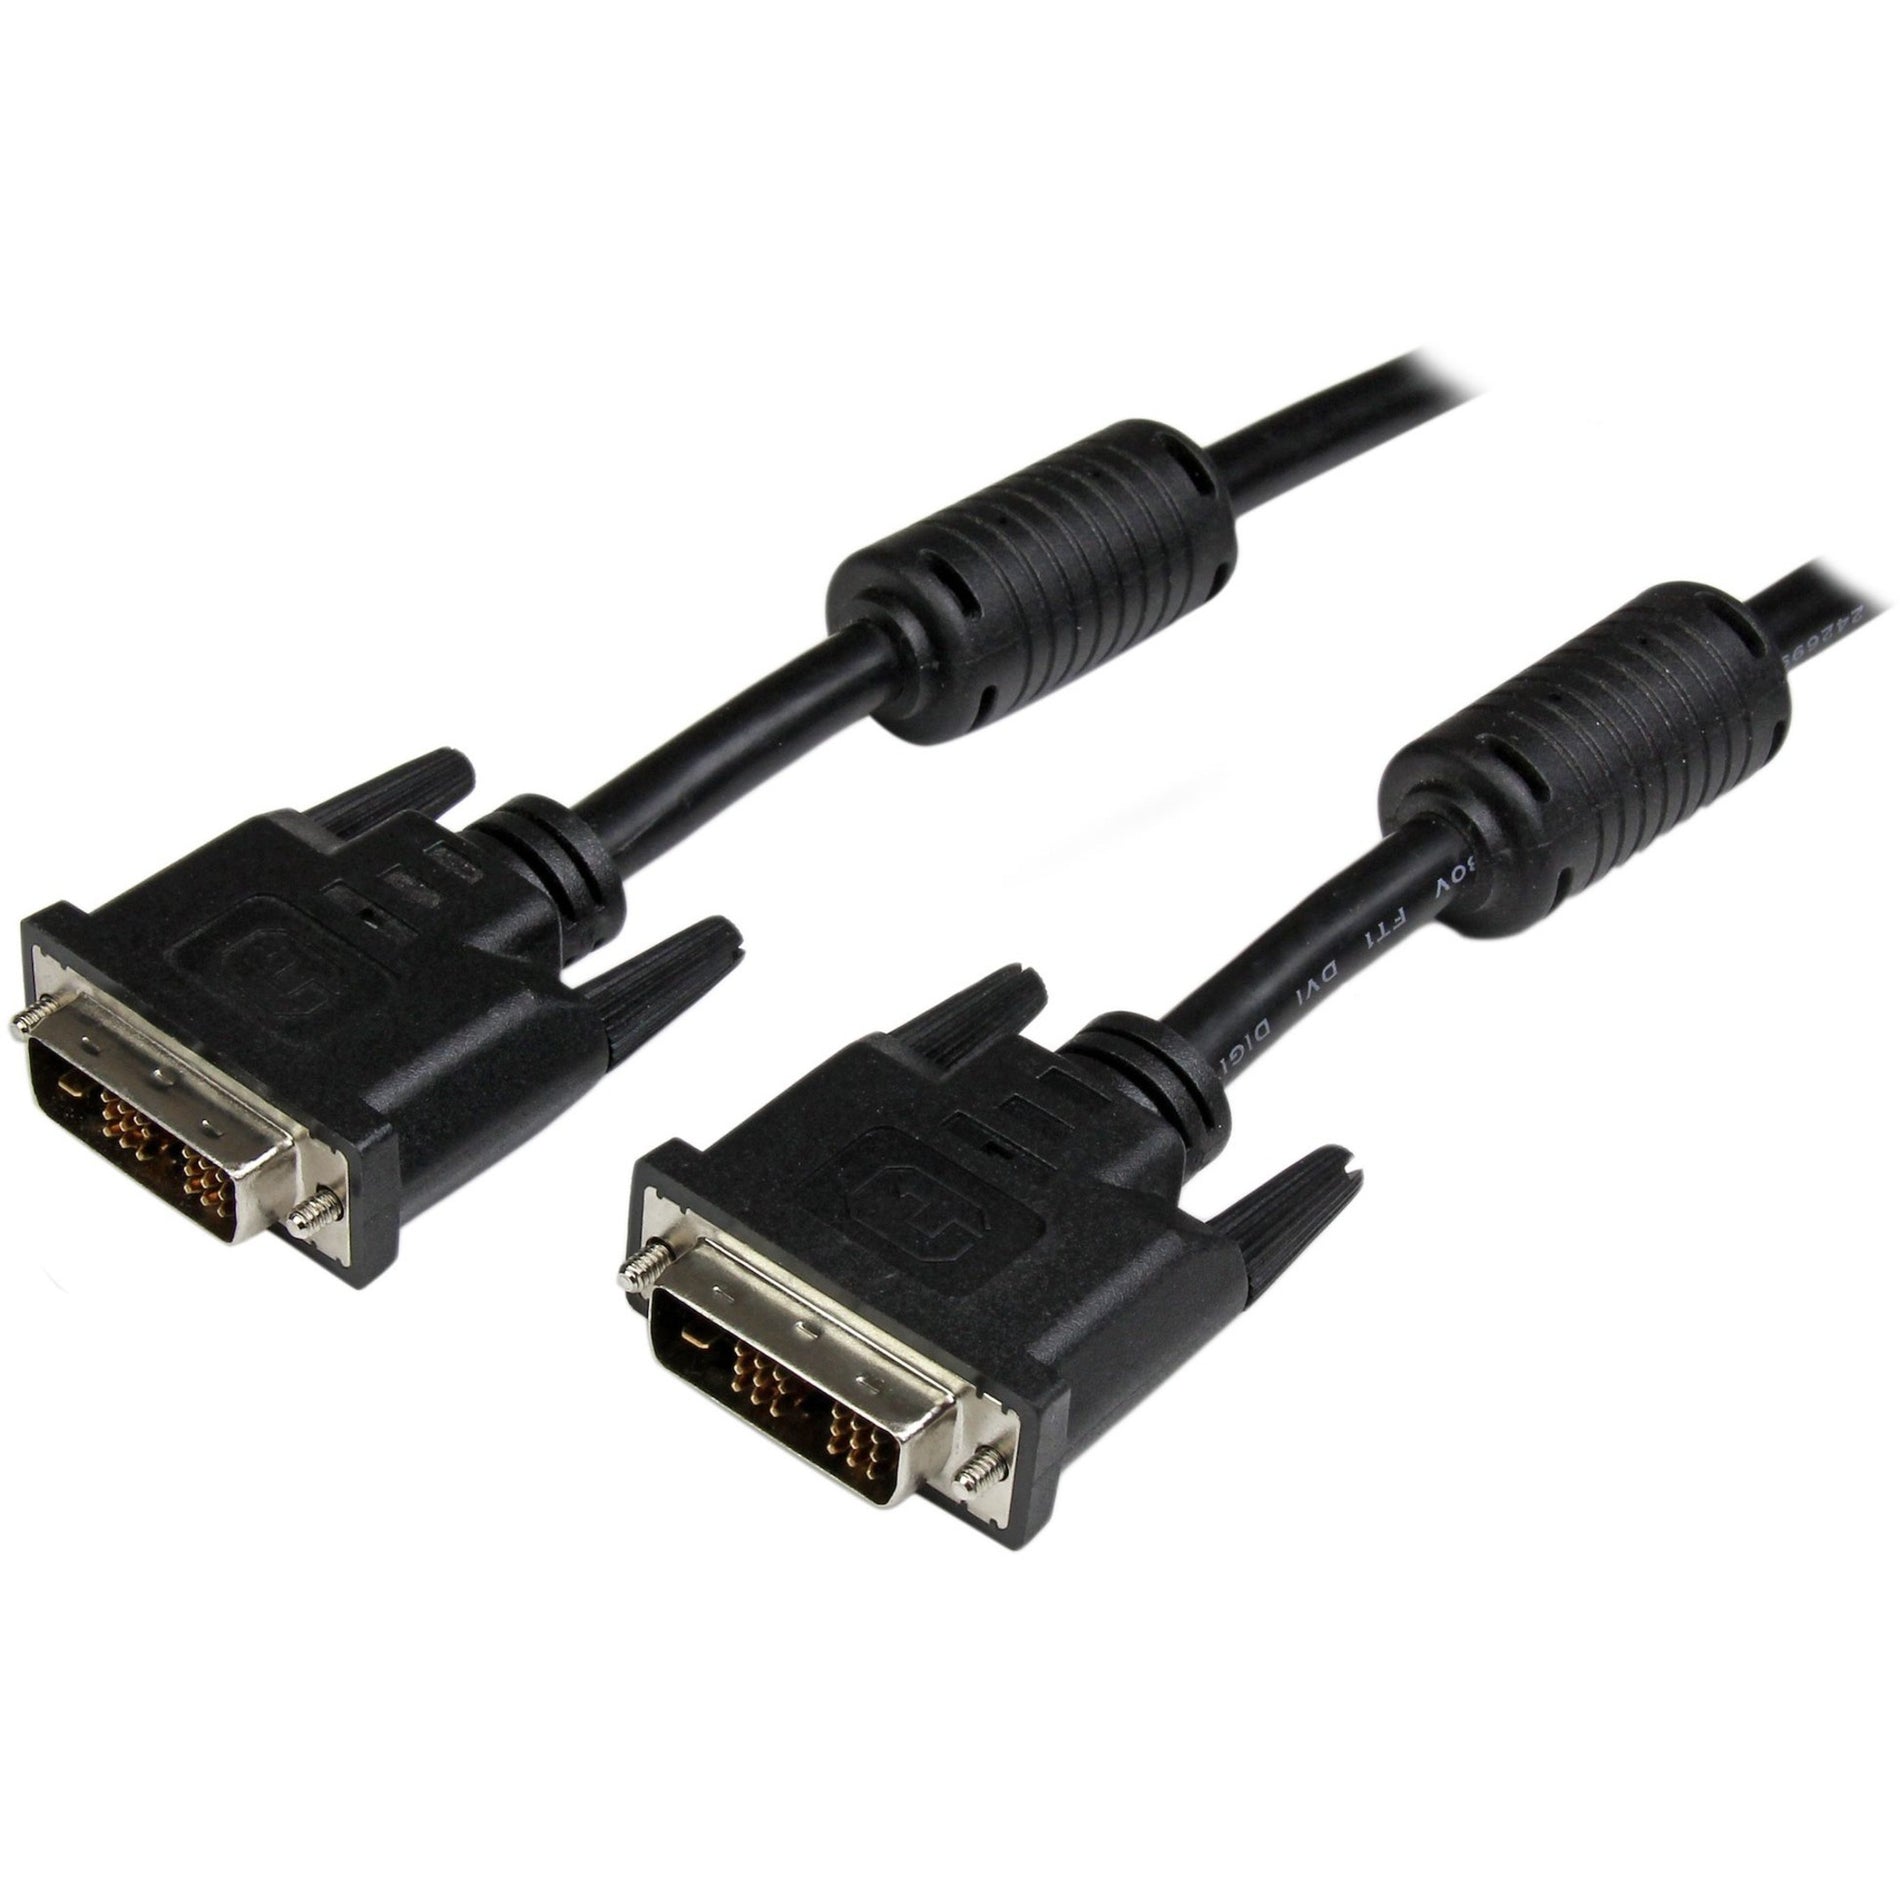 StarTech.com DVIDSMM20 20 ft DVI-D Single Link Cable - M/M, Supports Hot Plugging, Ideal for Monitors, Projectors, and HDTVs